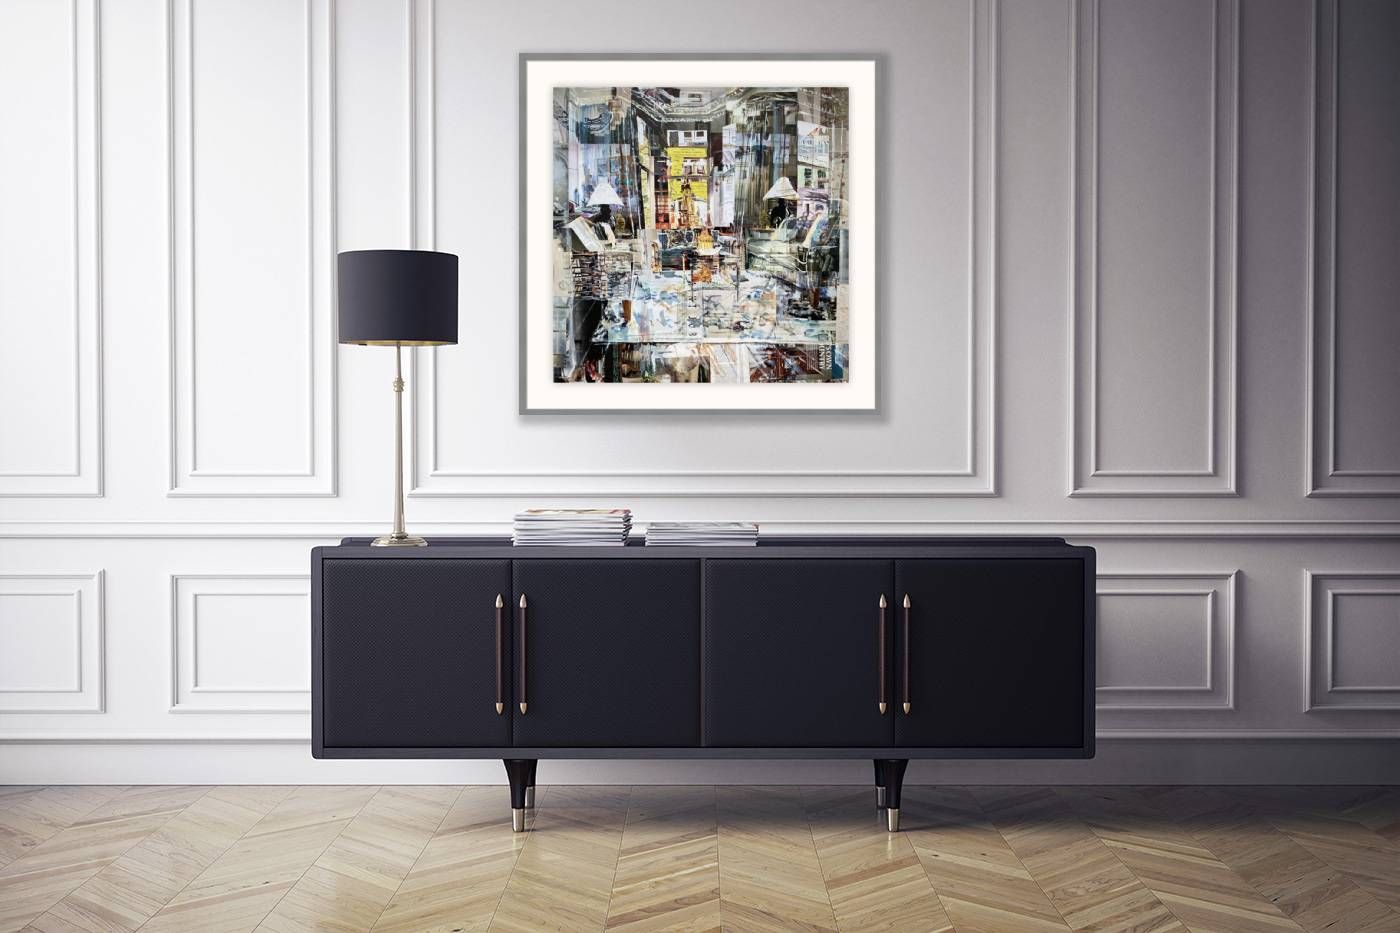 London Interior, Reception Room (own country) by Alison Pullen